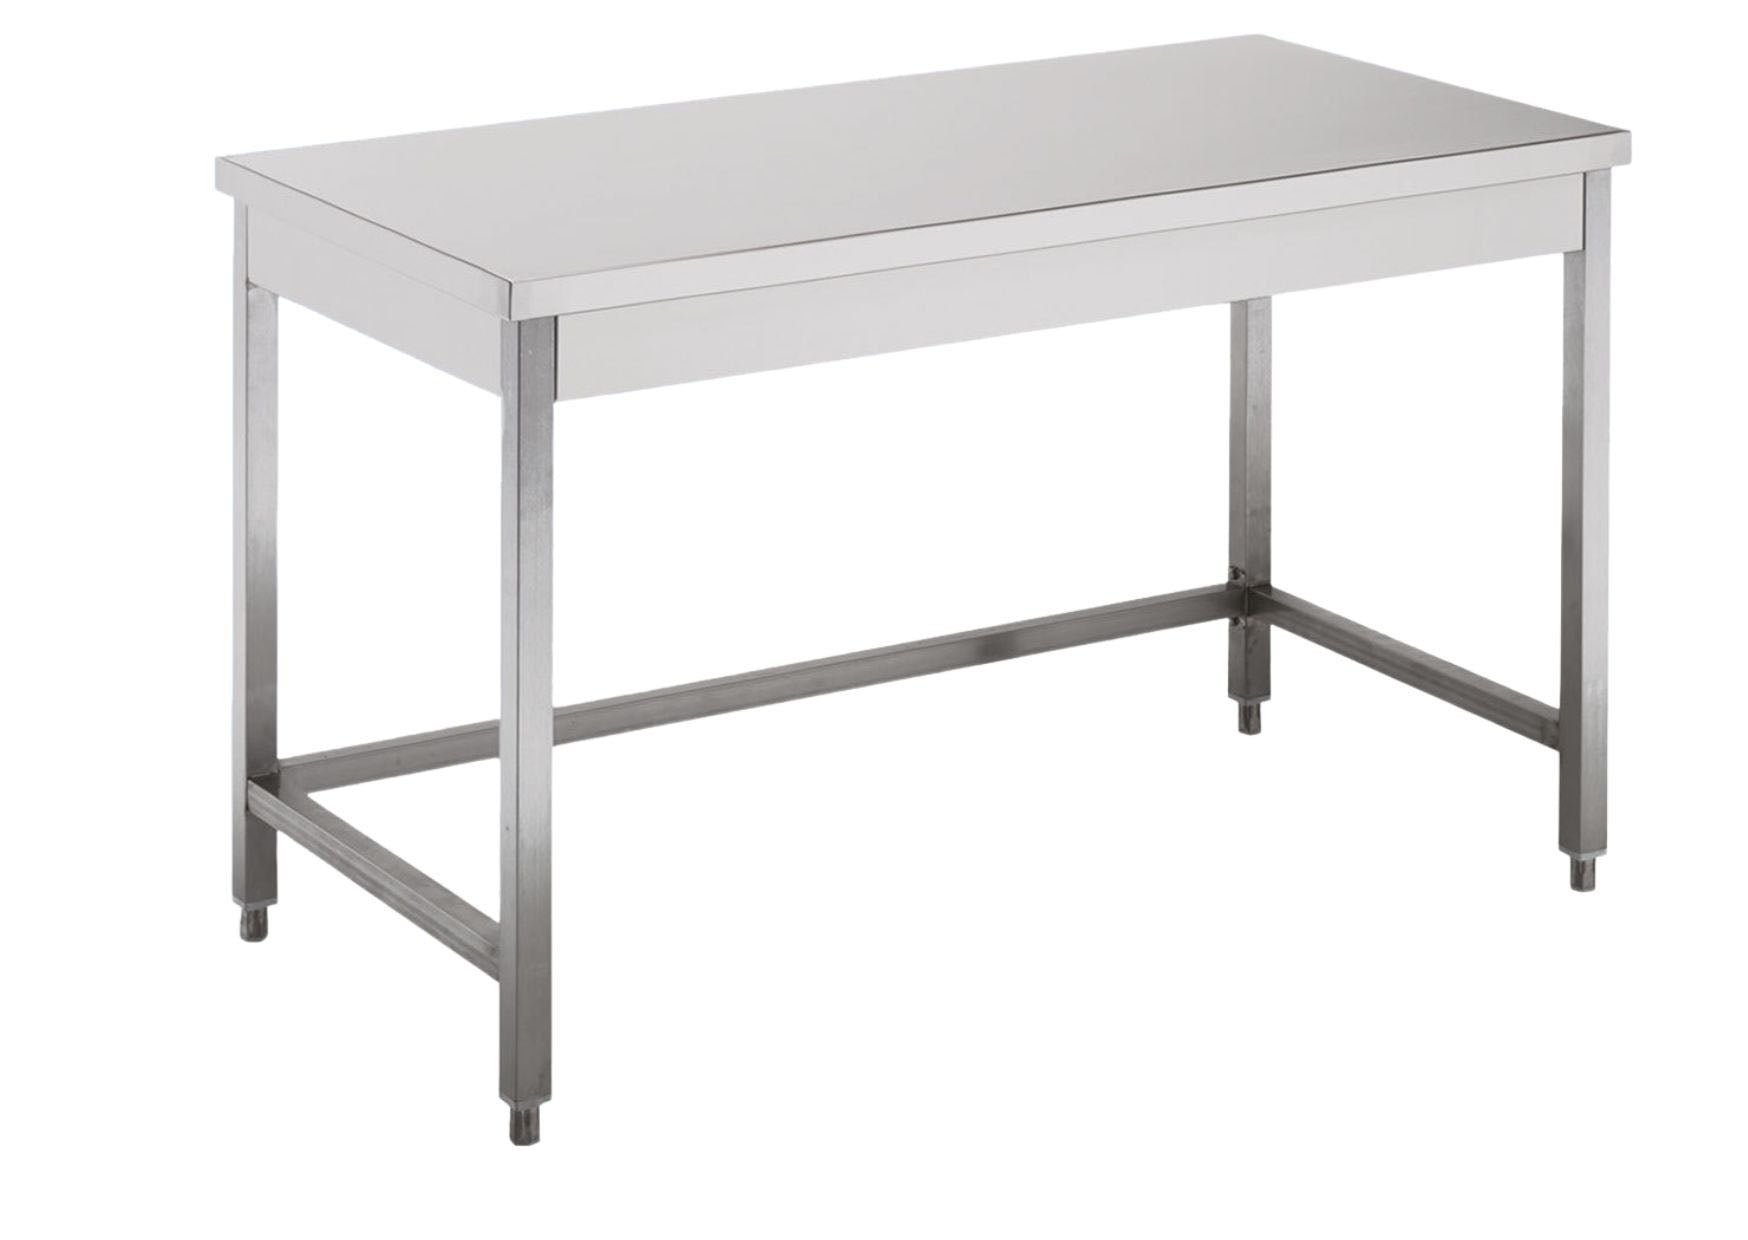 Stainless steel work table open